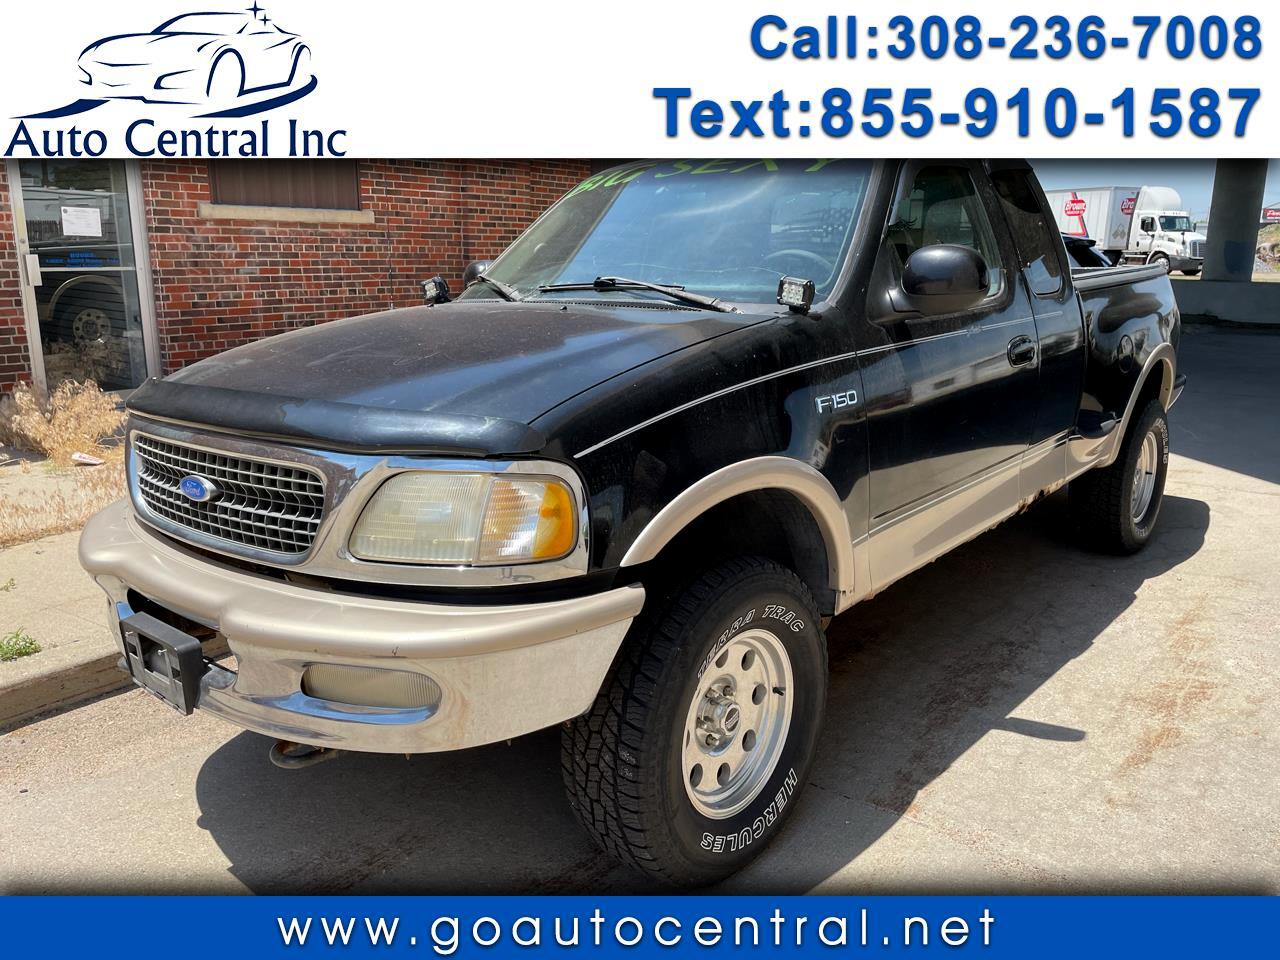 1997 Ford F-150 Supercab Flareside 139" 4WD Lariat